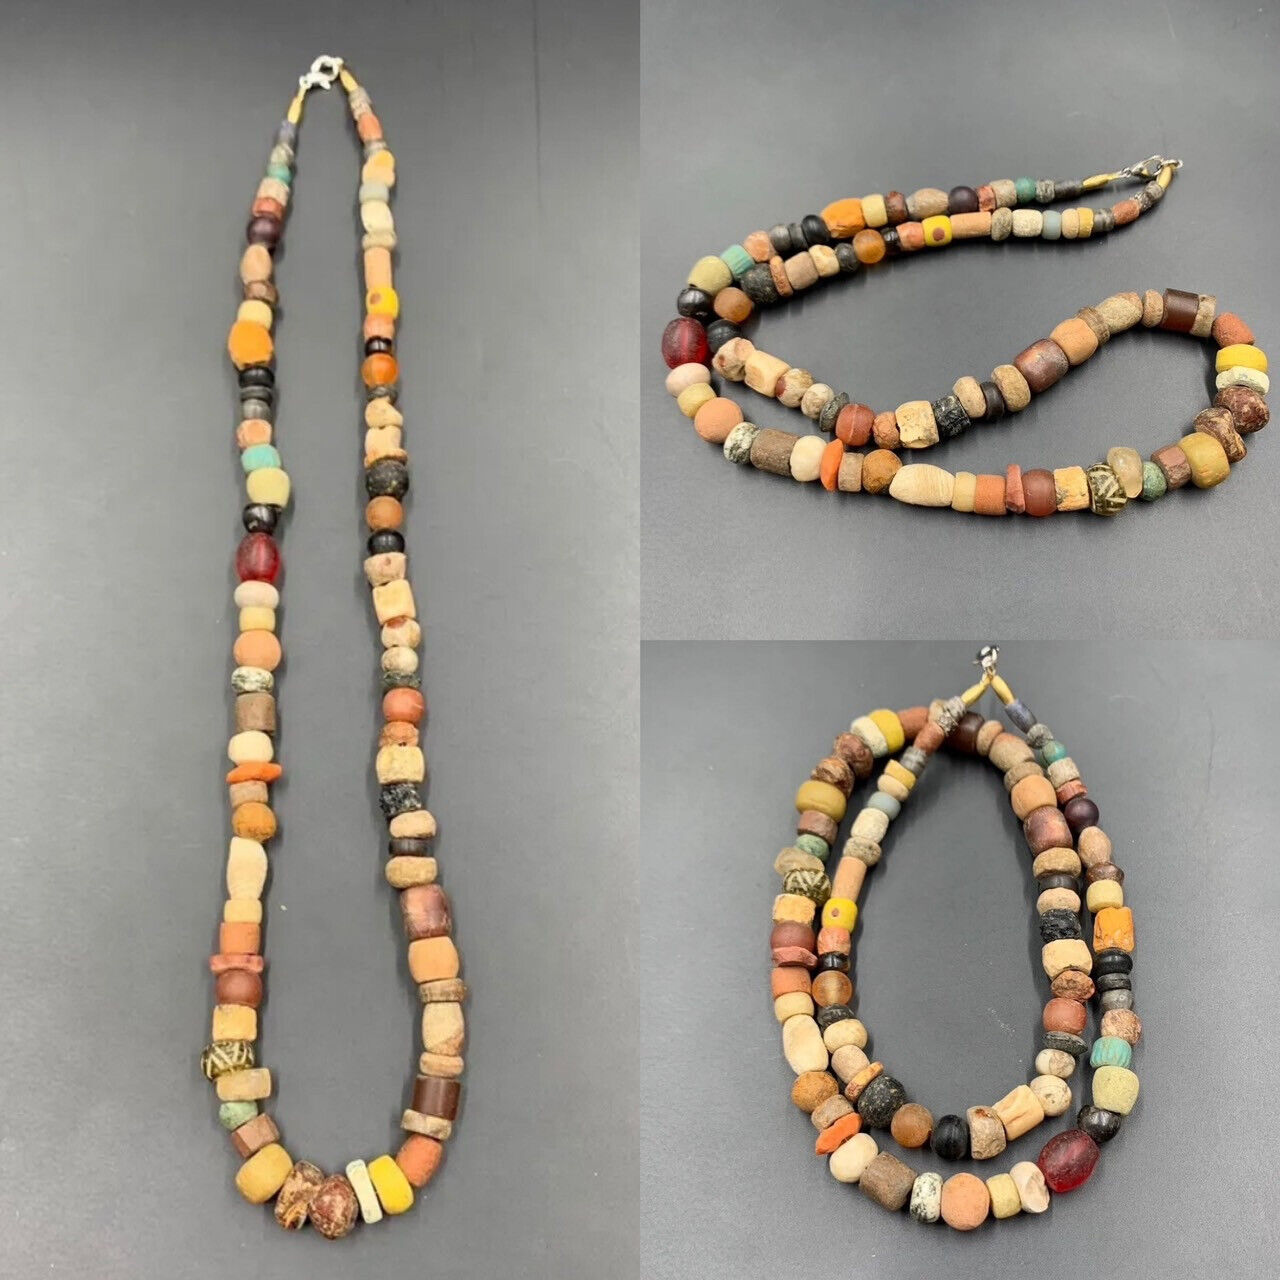 Very unique ancient old mix stone with few ancient glass beads necklace .